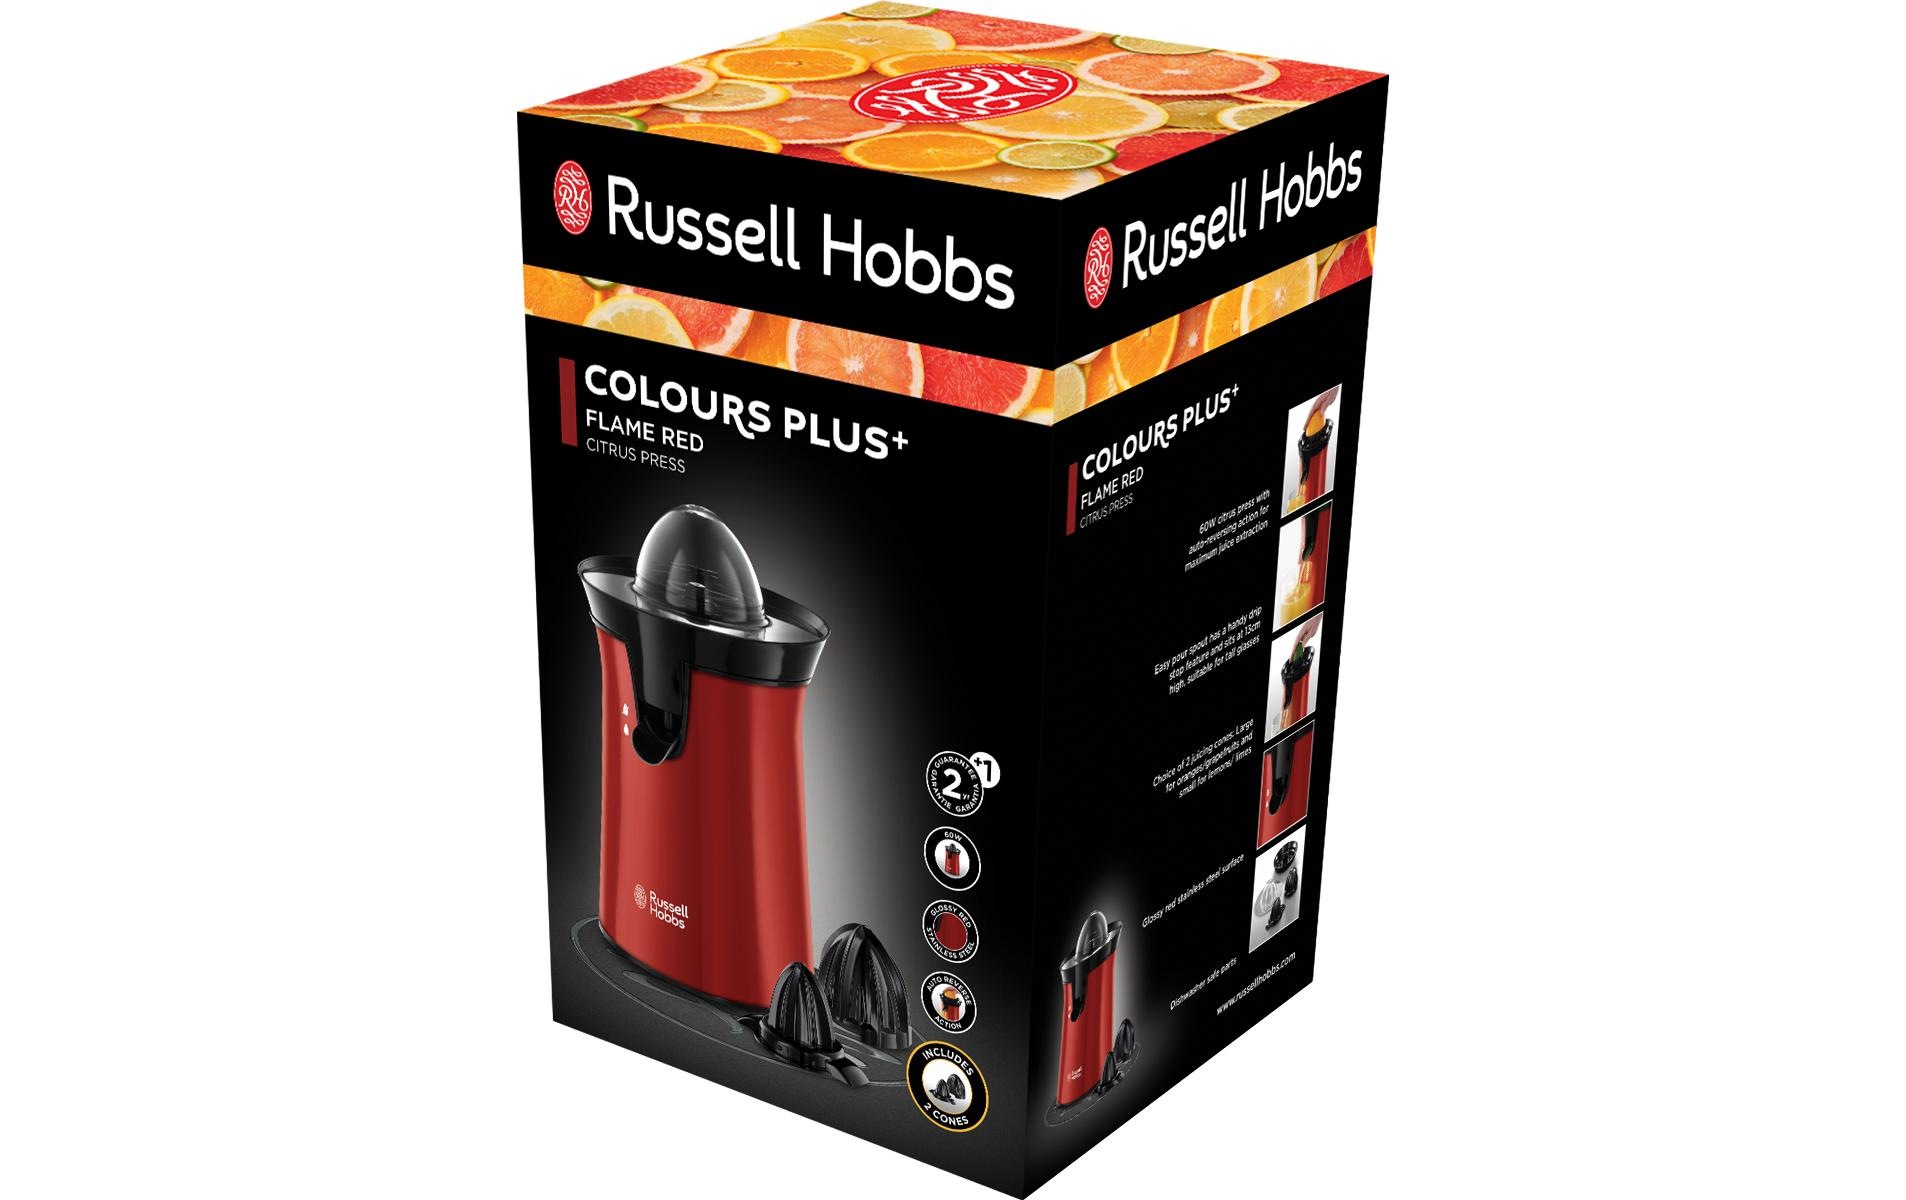 RUSSELL HOBBS Zitruspresse »Colours Plus+ Flame Red«, 60 W